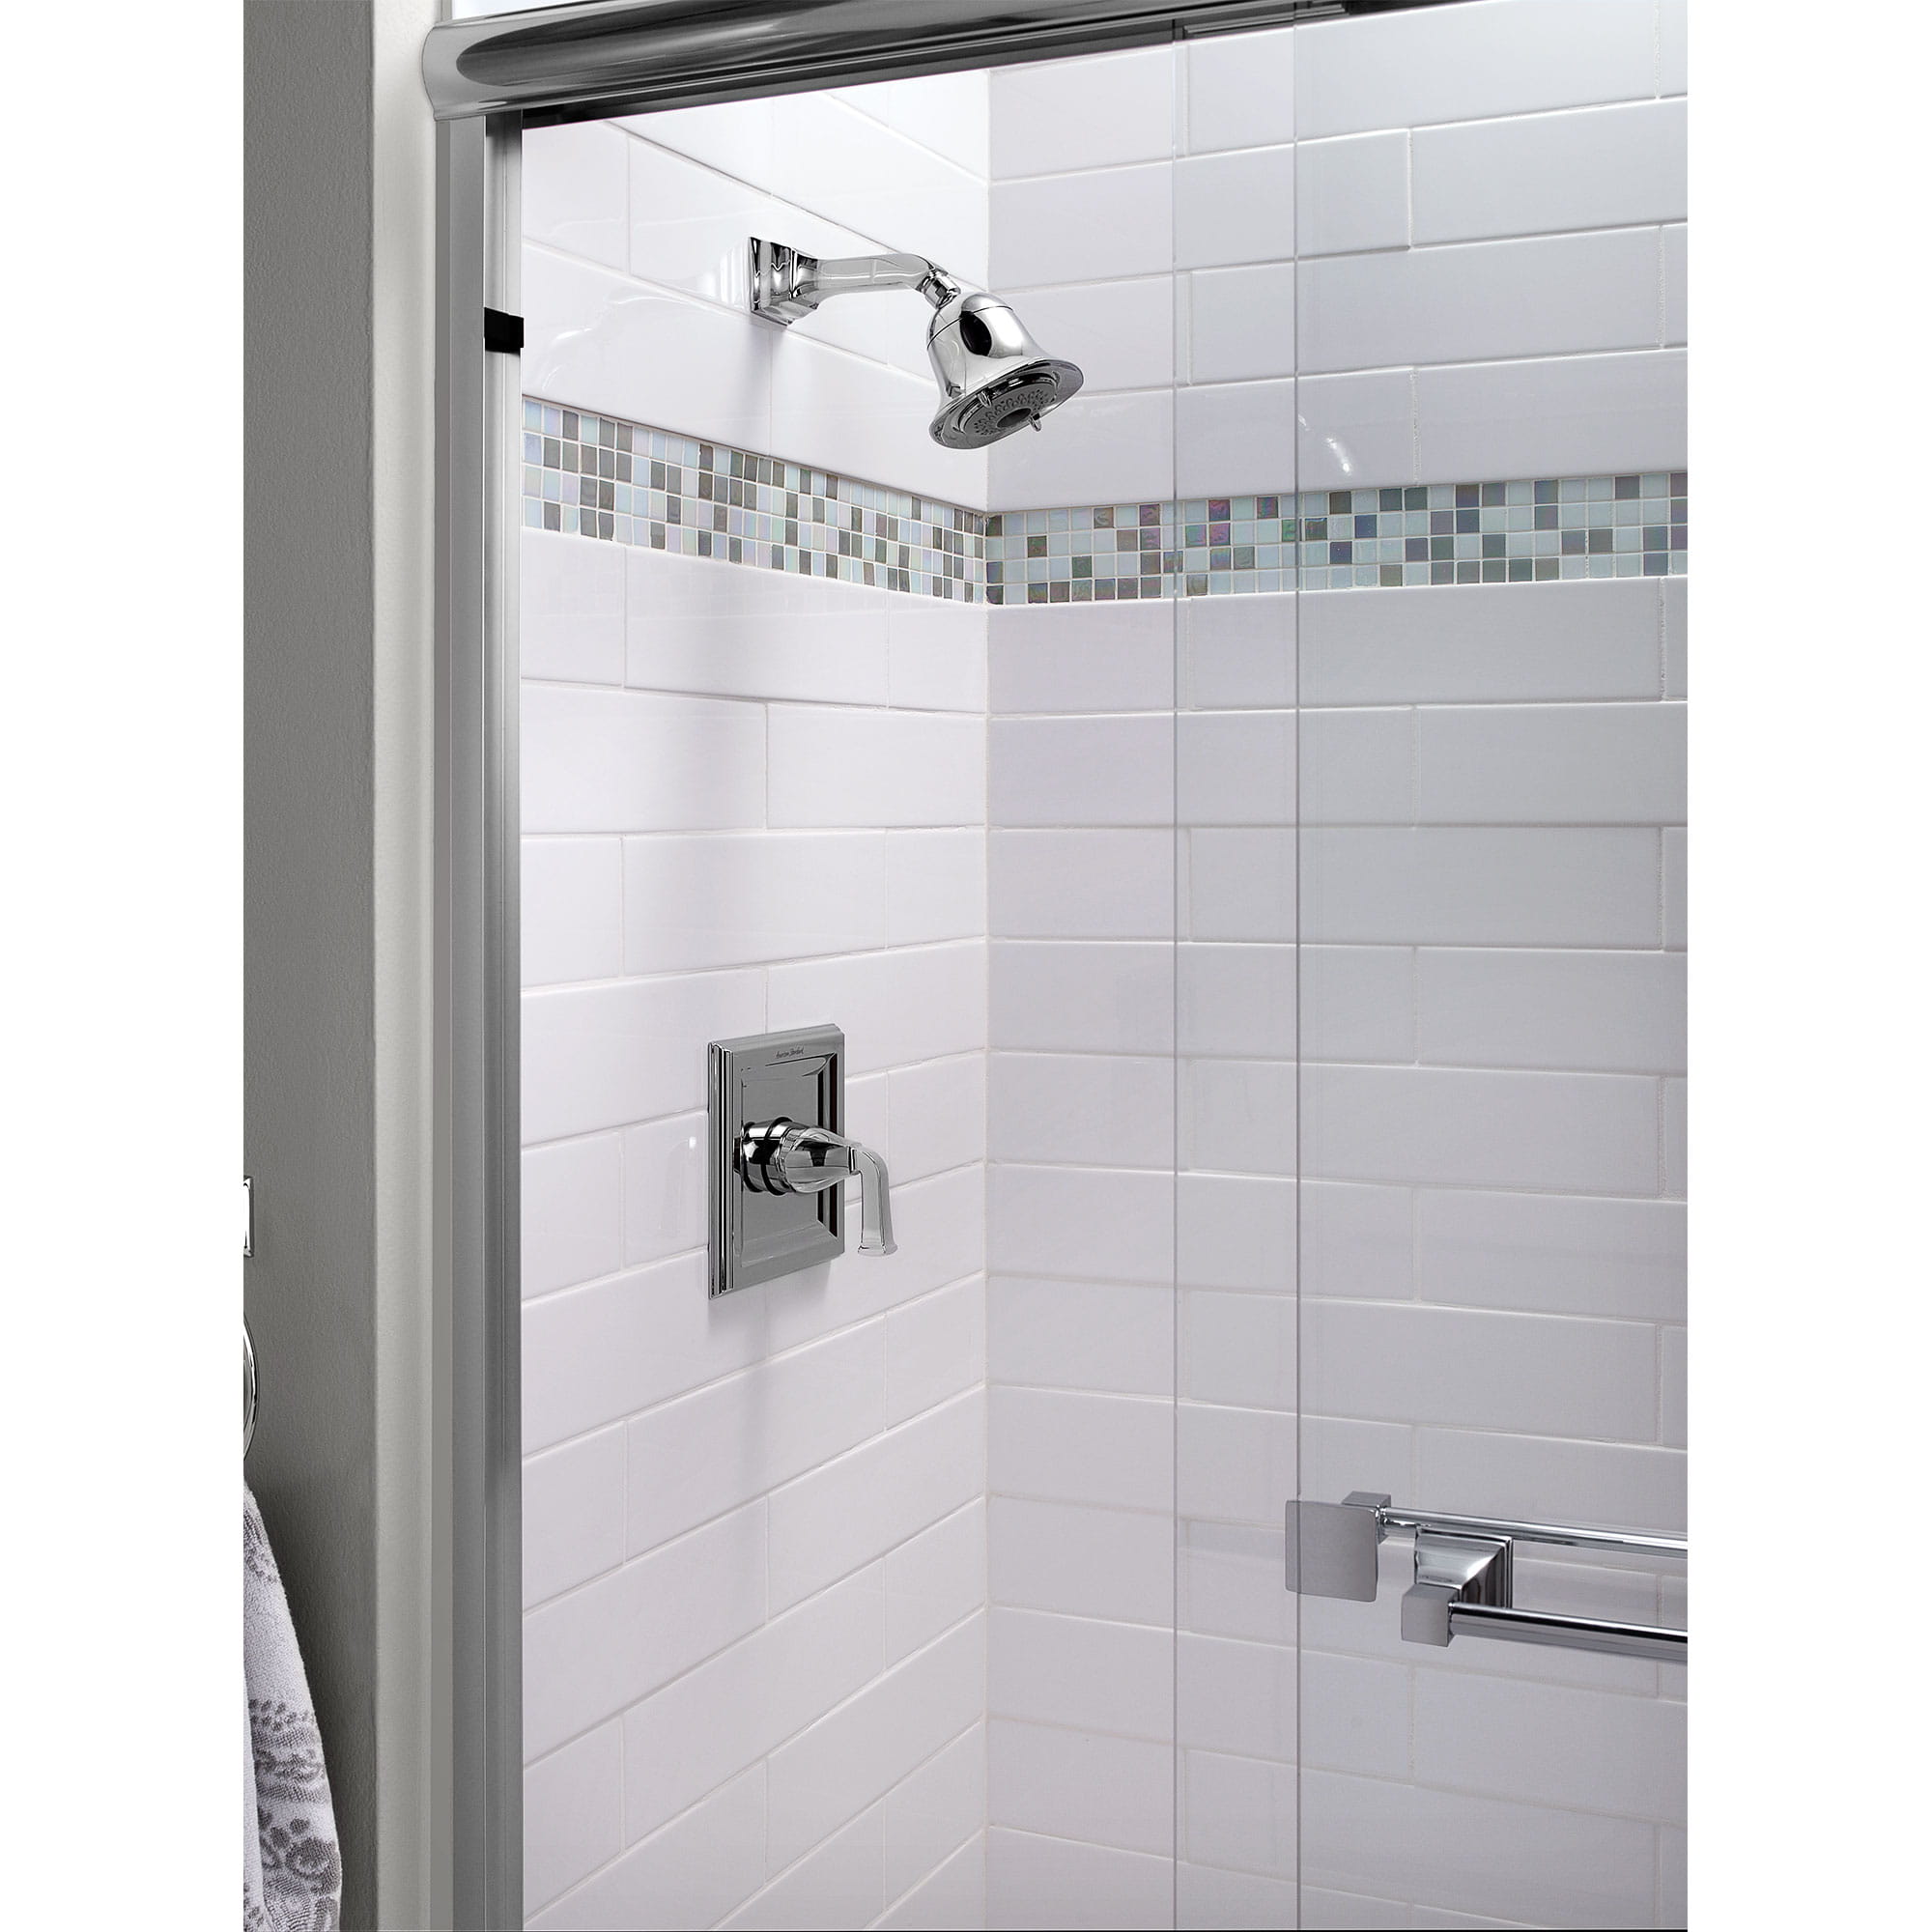 Town Square 20 GPM Shower Trim Kit with FloWise Showerhead and Lever Handle CHROME